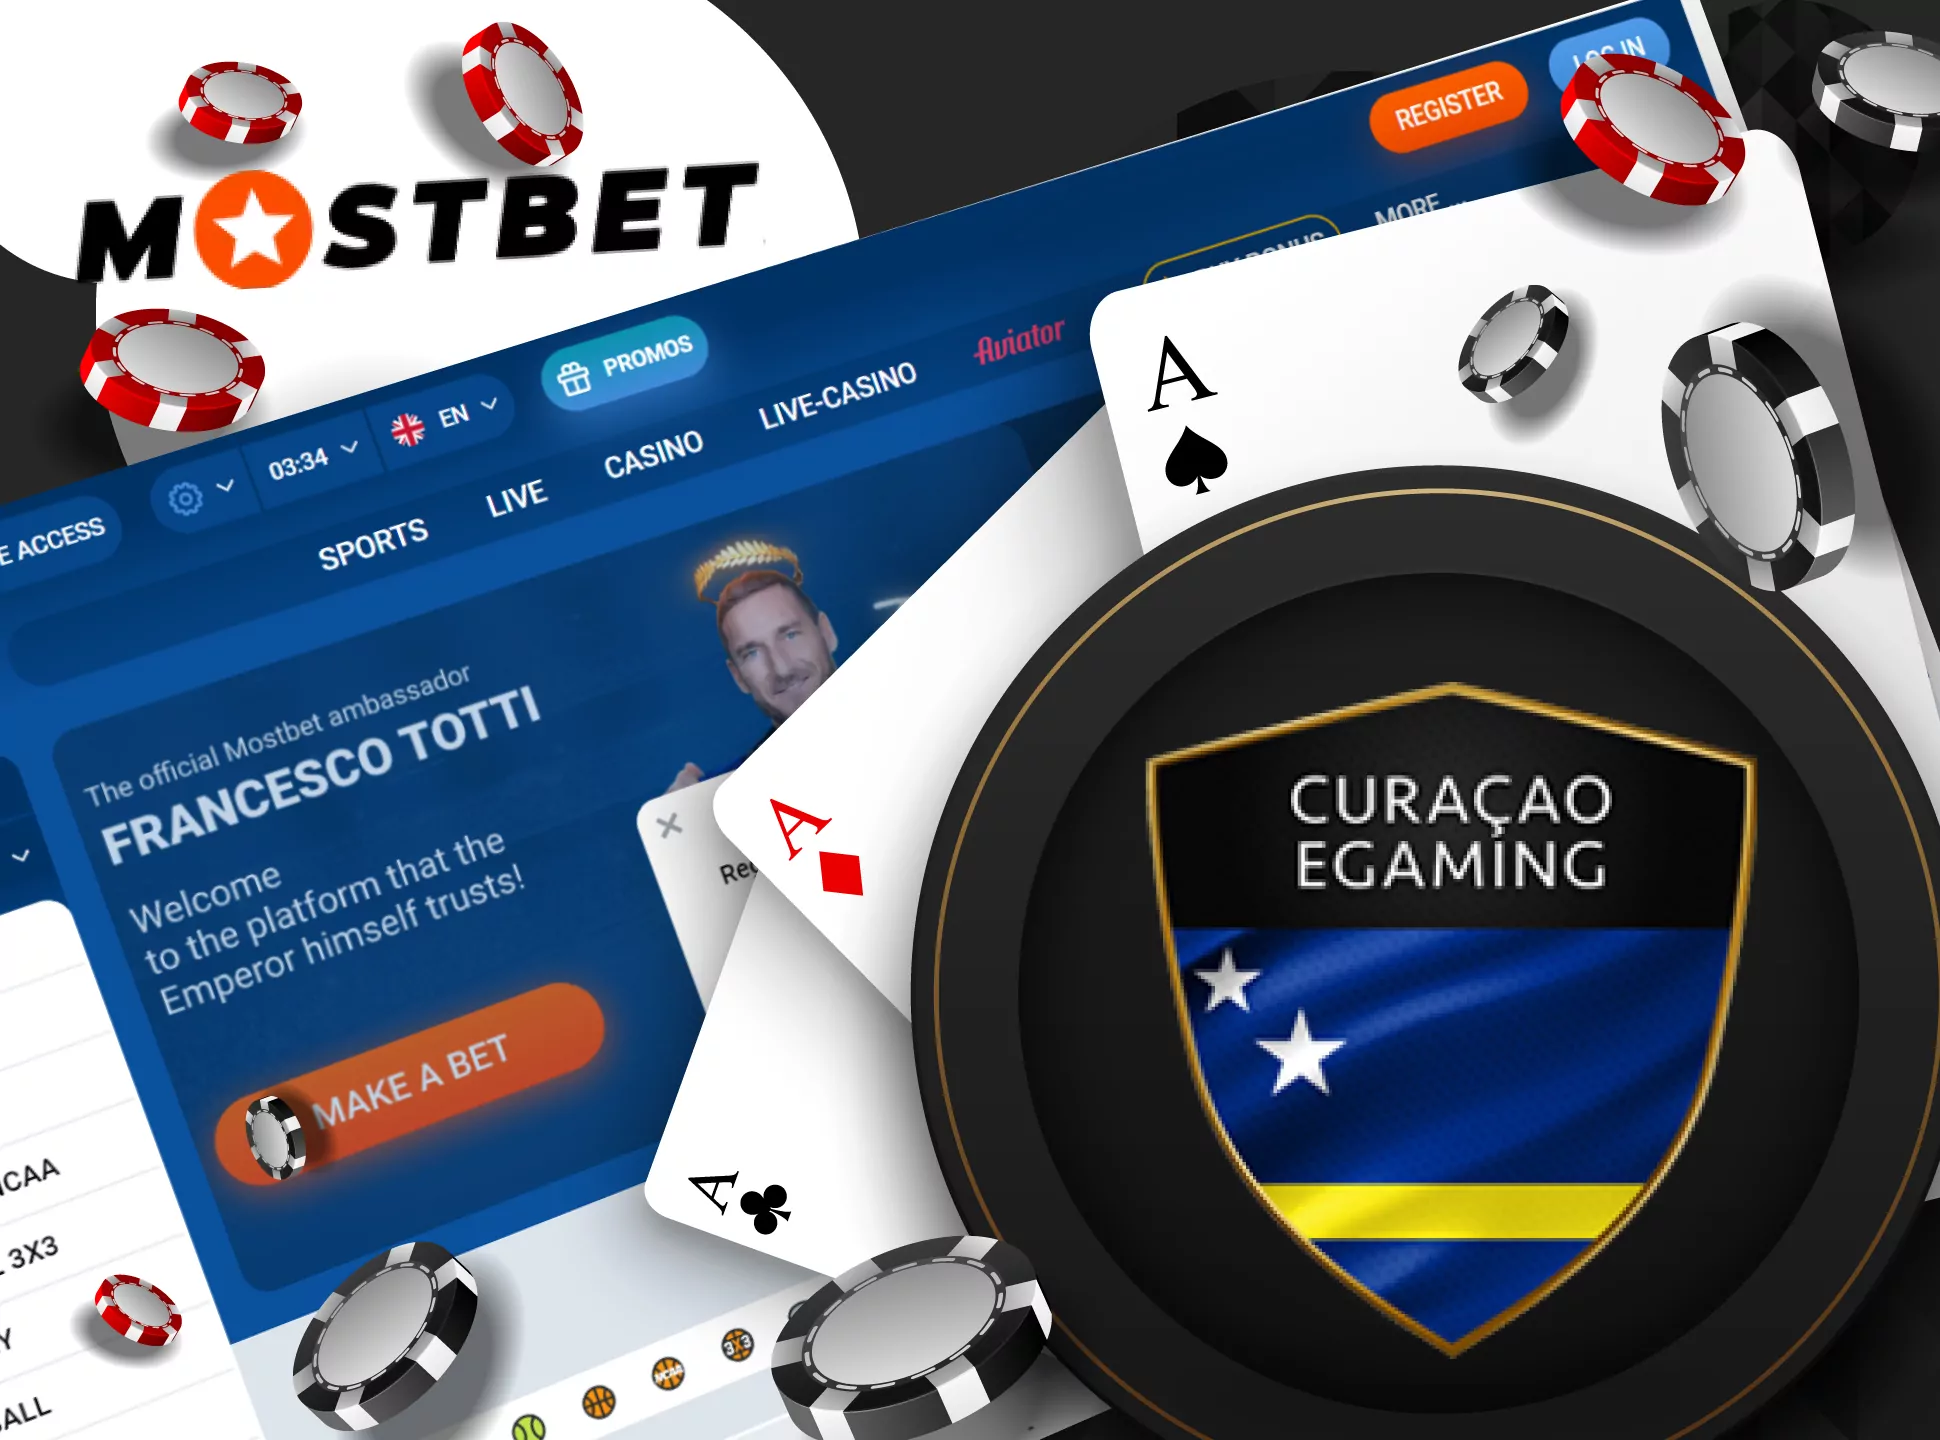 Mostbet casino is regulated by the Curacao eGaming Commission.